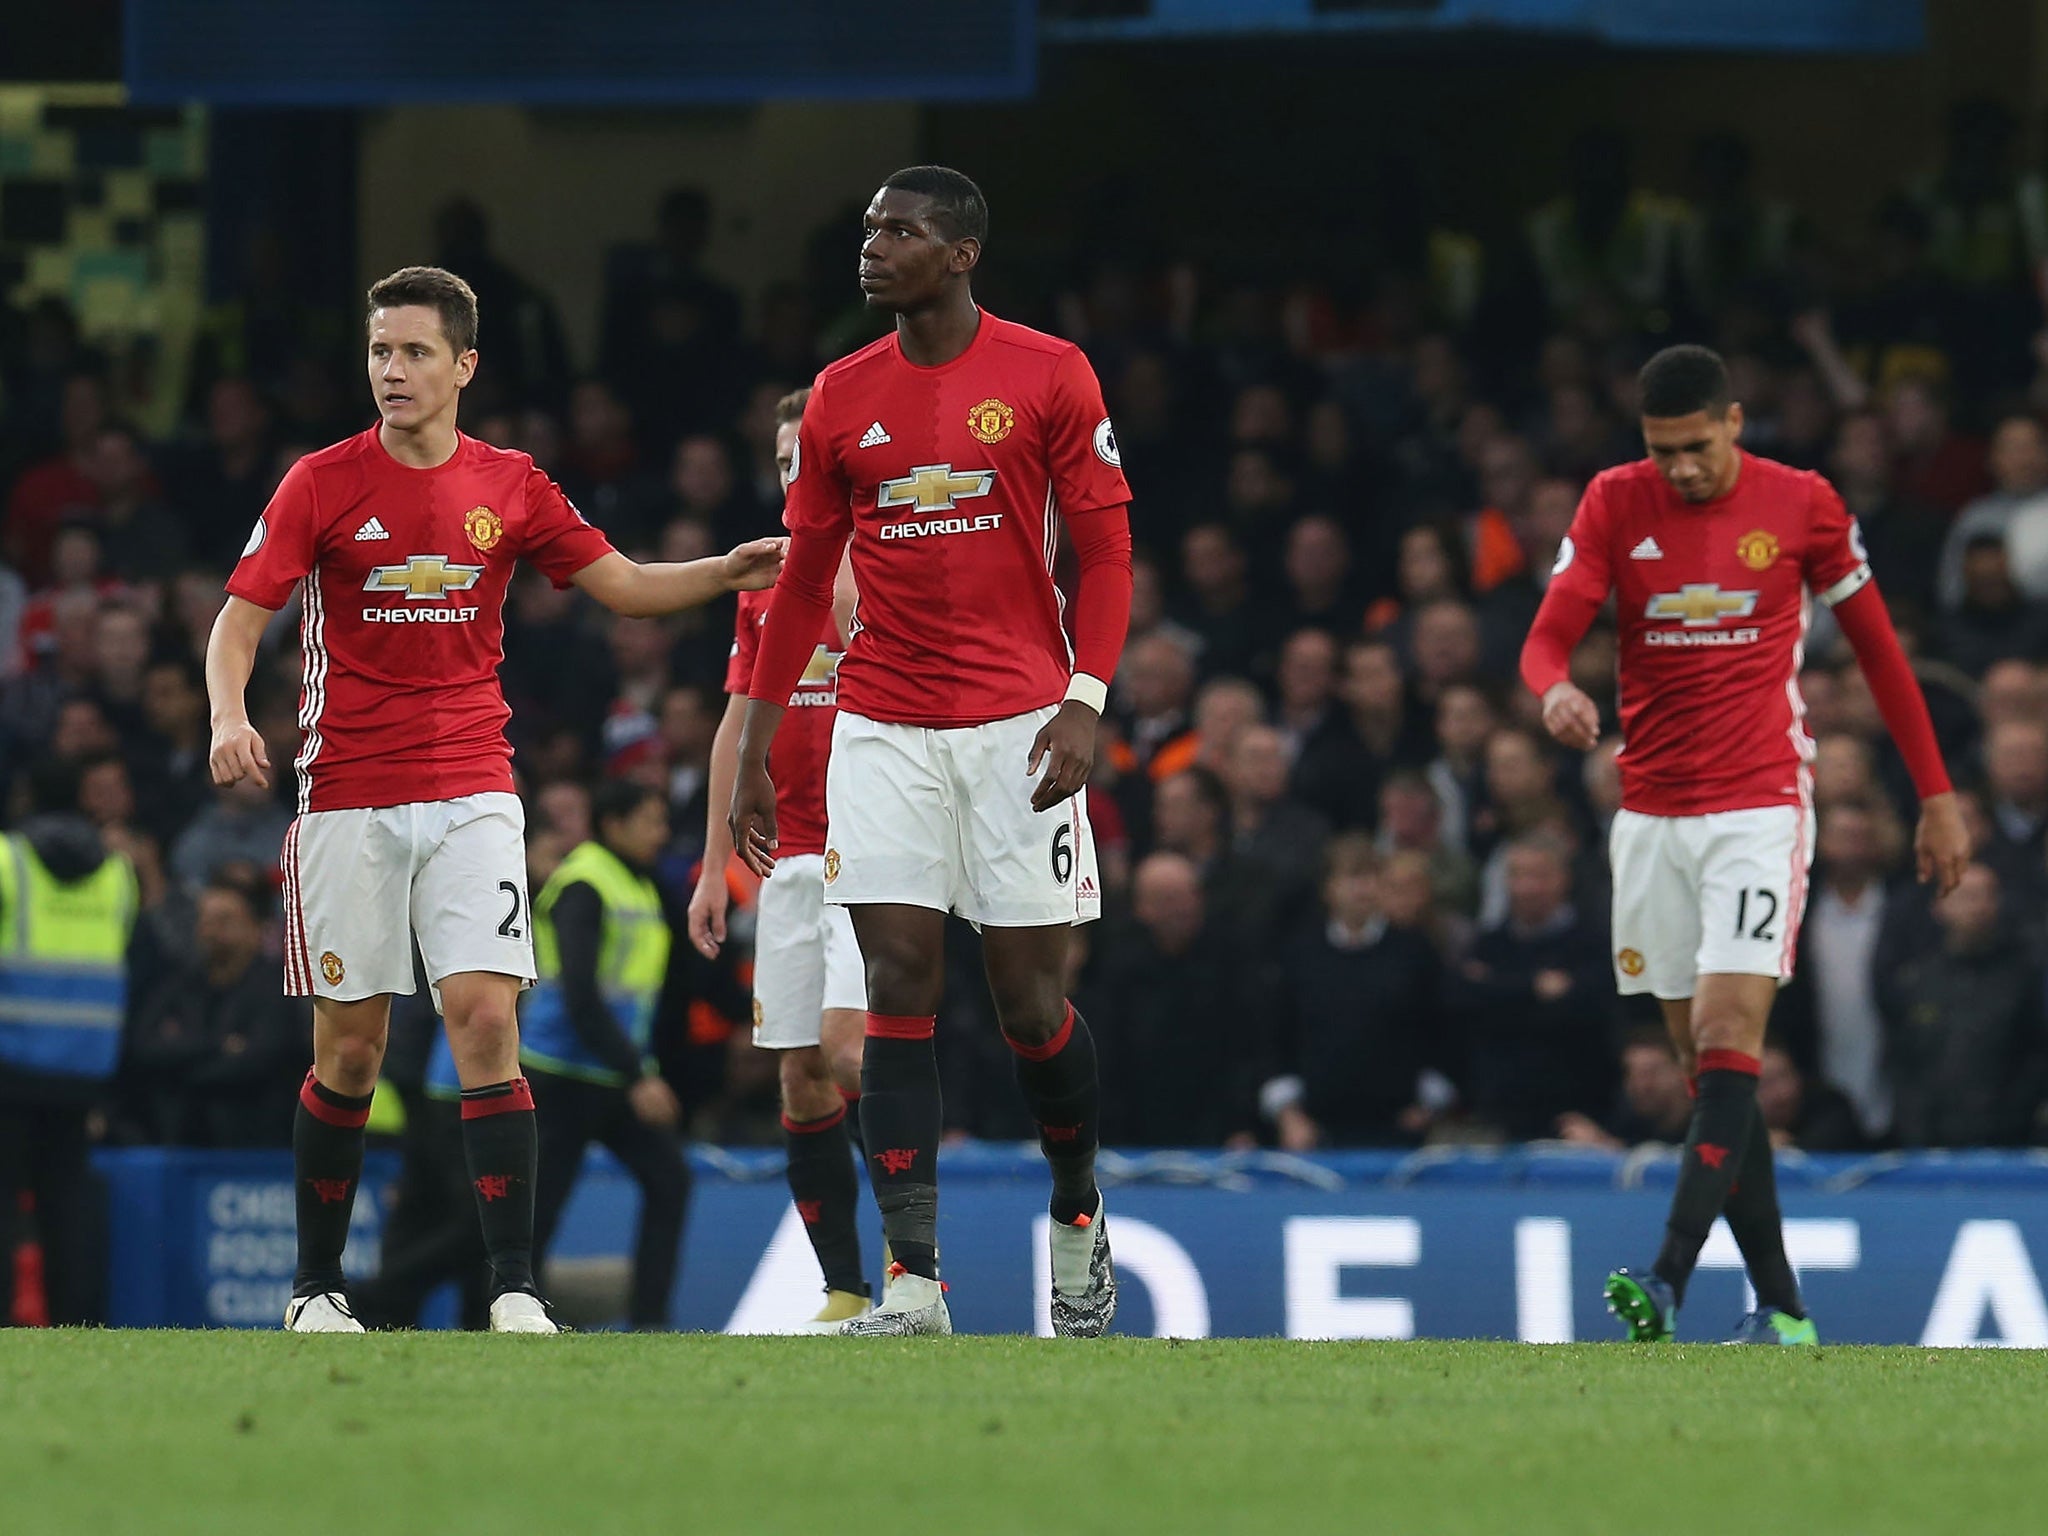 United were humiliated from the first minute to the last at Stamford Bridge